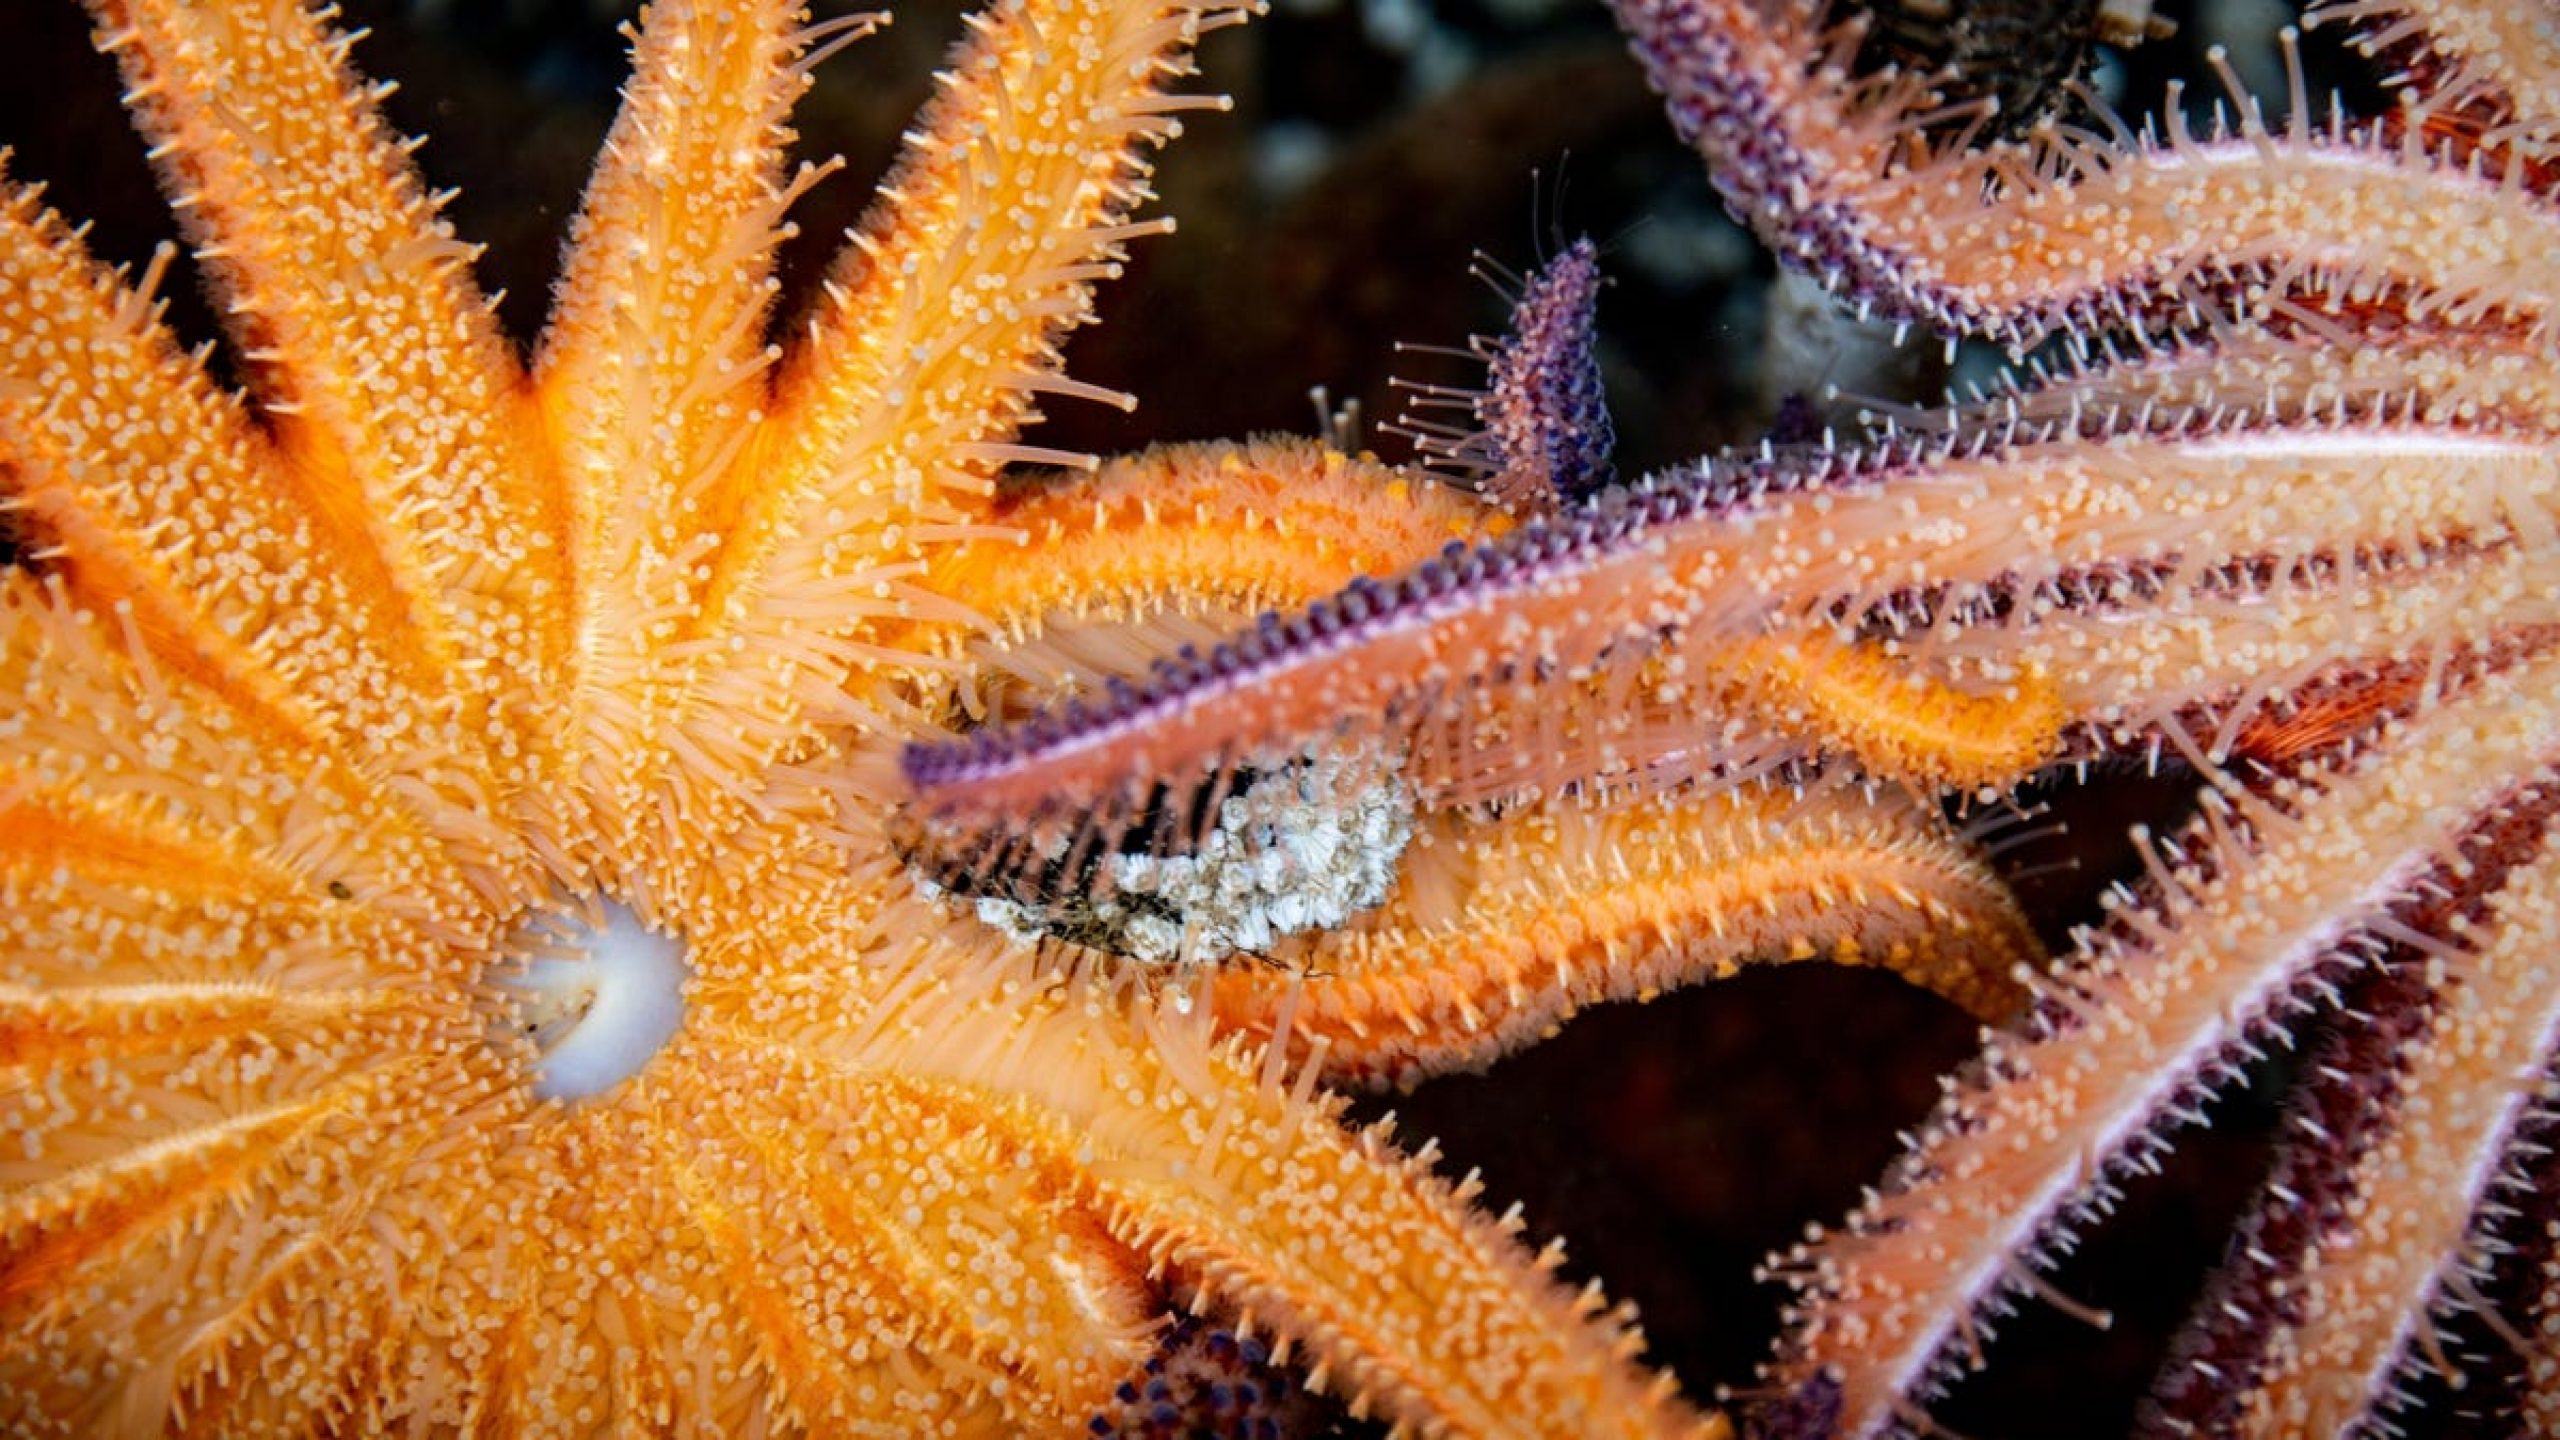 Scientists Are Racing to Save These Sea Stars From Extinction